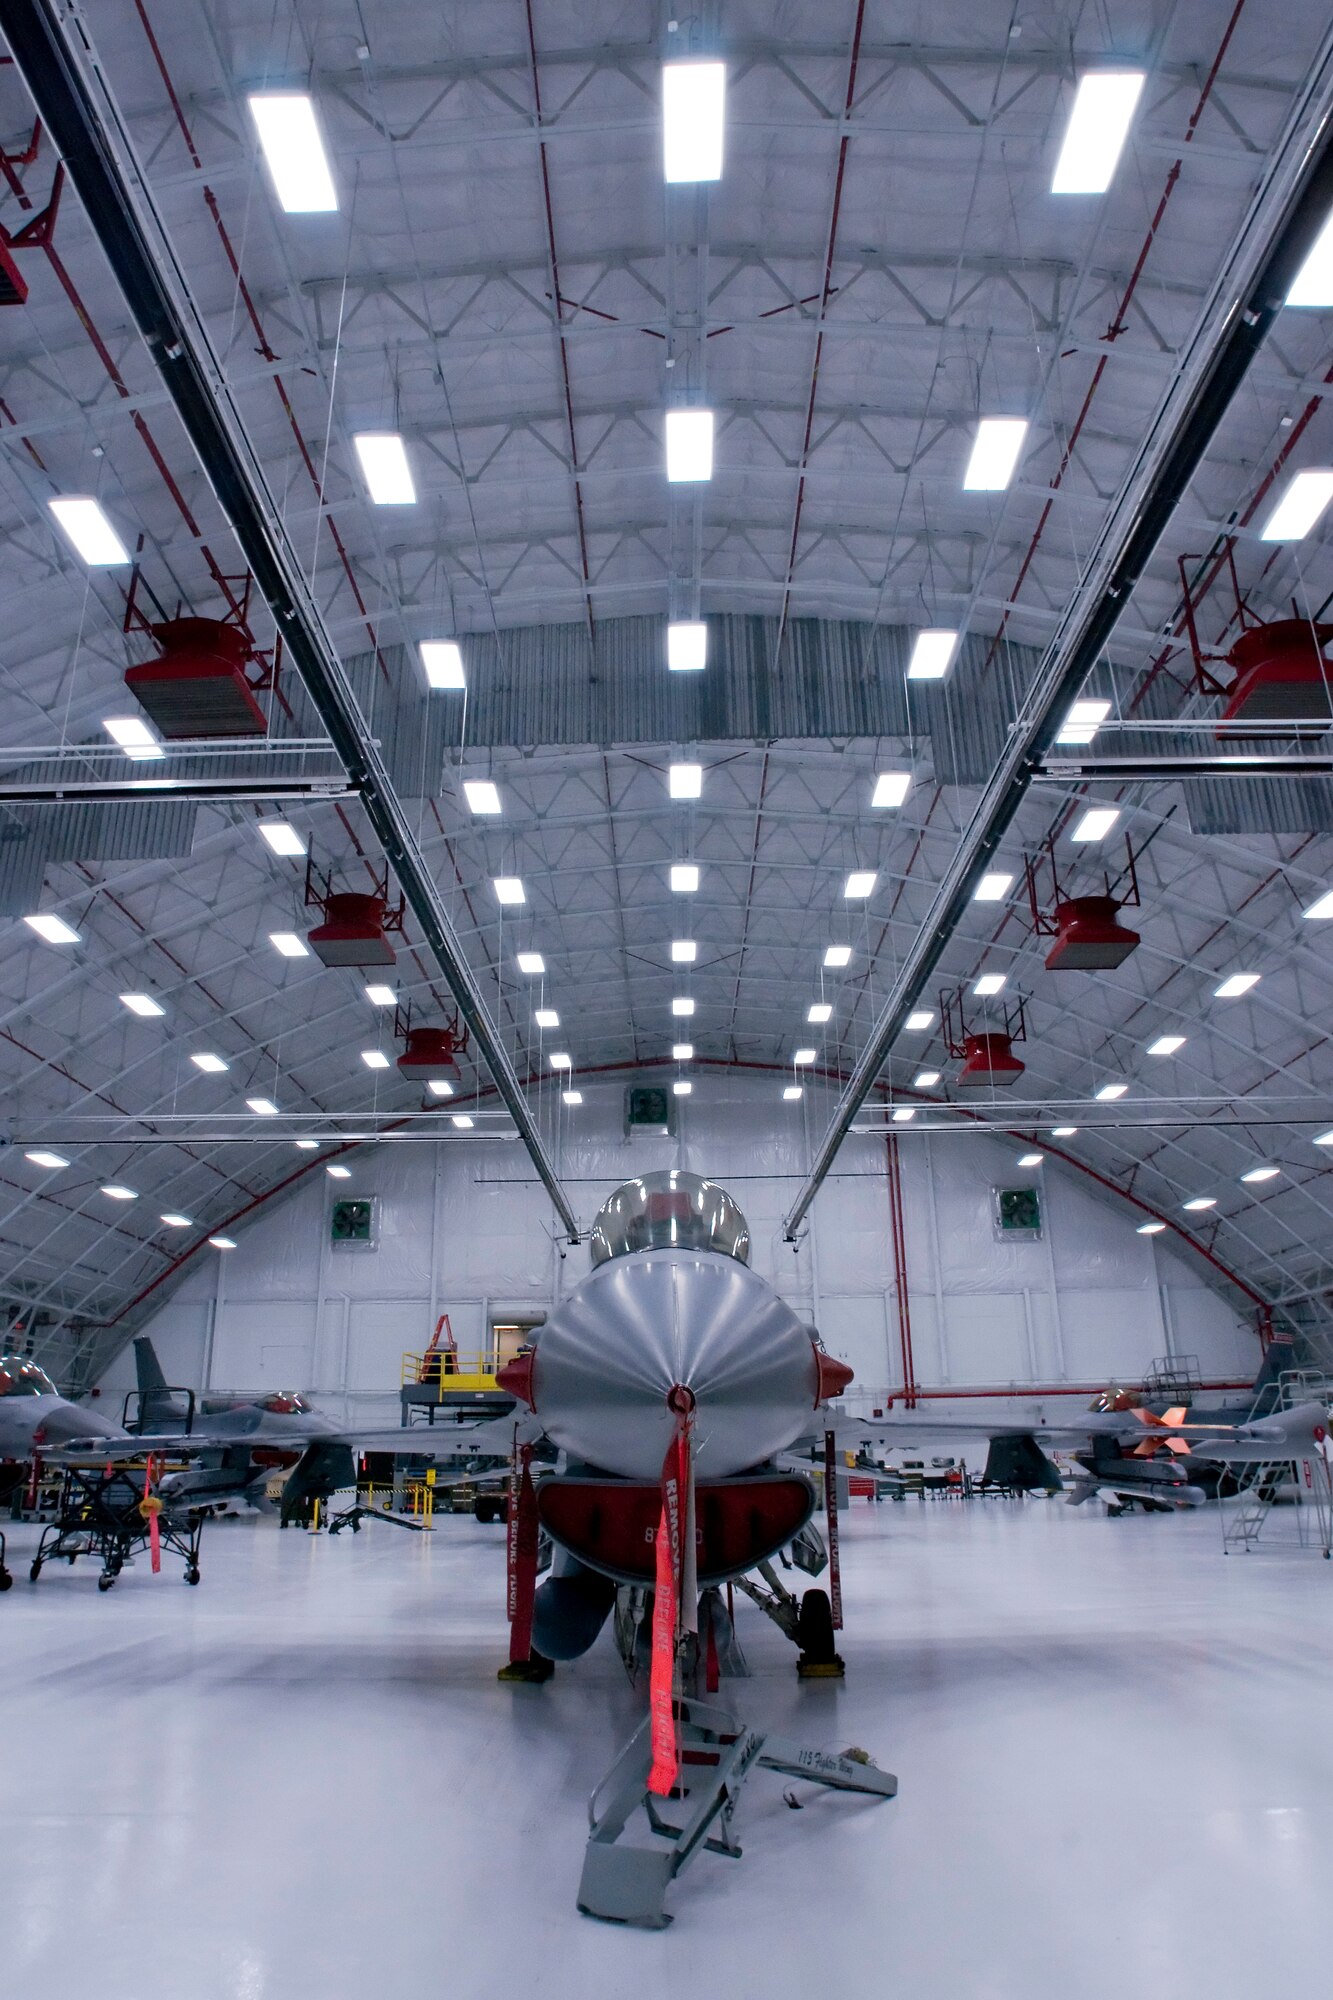 F-16C Fighting Falcons from the 115th Fighter Wing, Madison, Wis., are housed inside a newly remodeled aircraft hangar Jan. 23, 2008.  This $2 million facility upgrade project was completed Dec. 29, 2008 and included the installation of an upgraded fire suppression system, ceiling system, floor and new operational hangar doors.  (U.S. Air Force Photo by: Master Sgt. Paul Gorman) (Released)